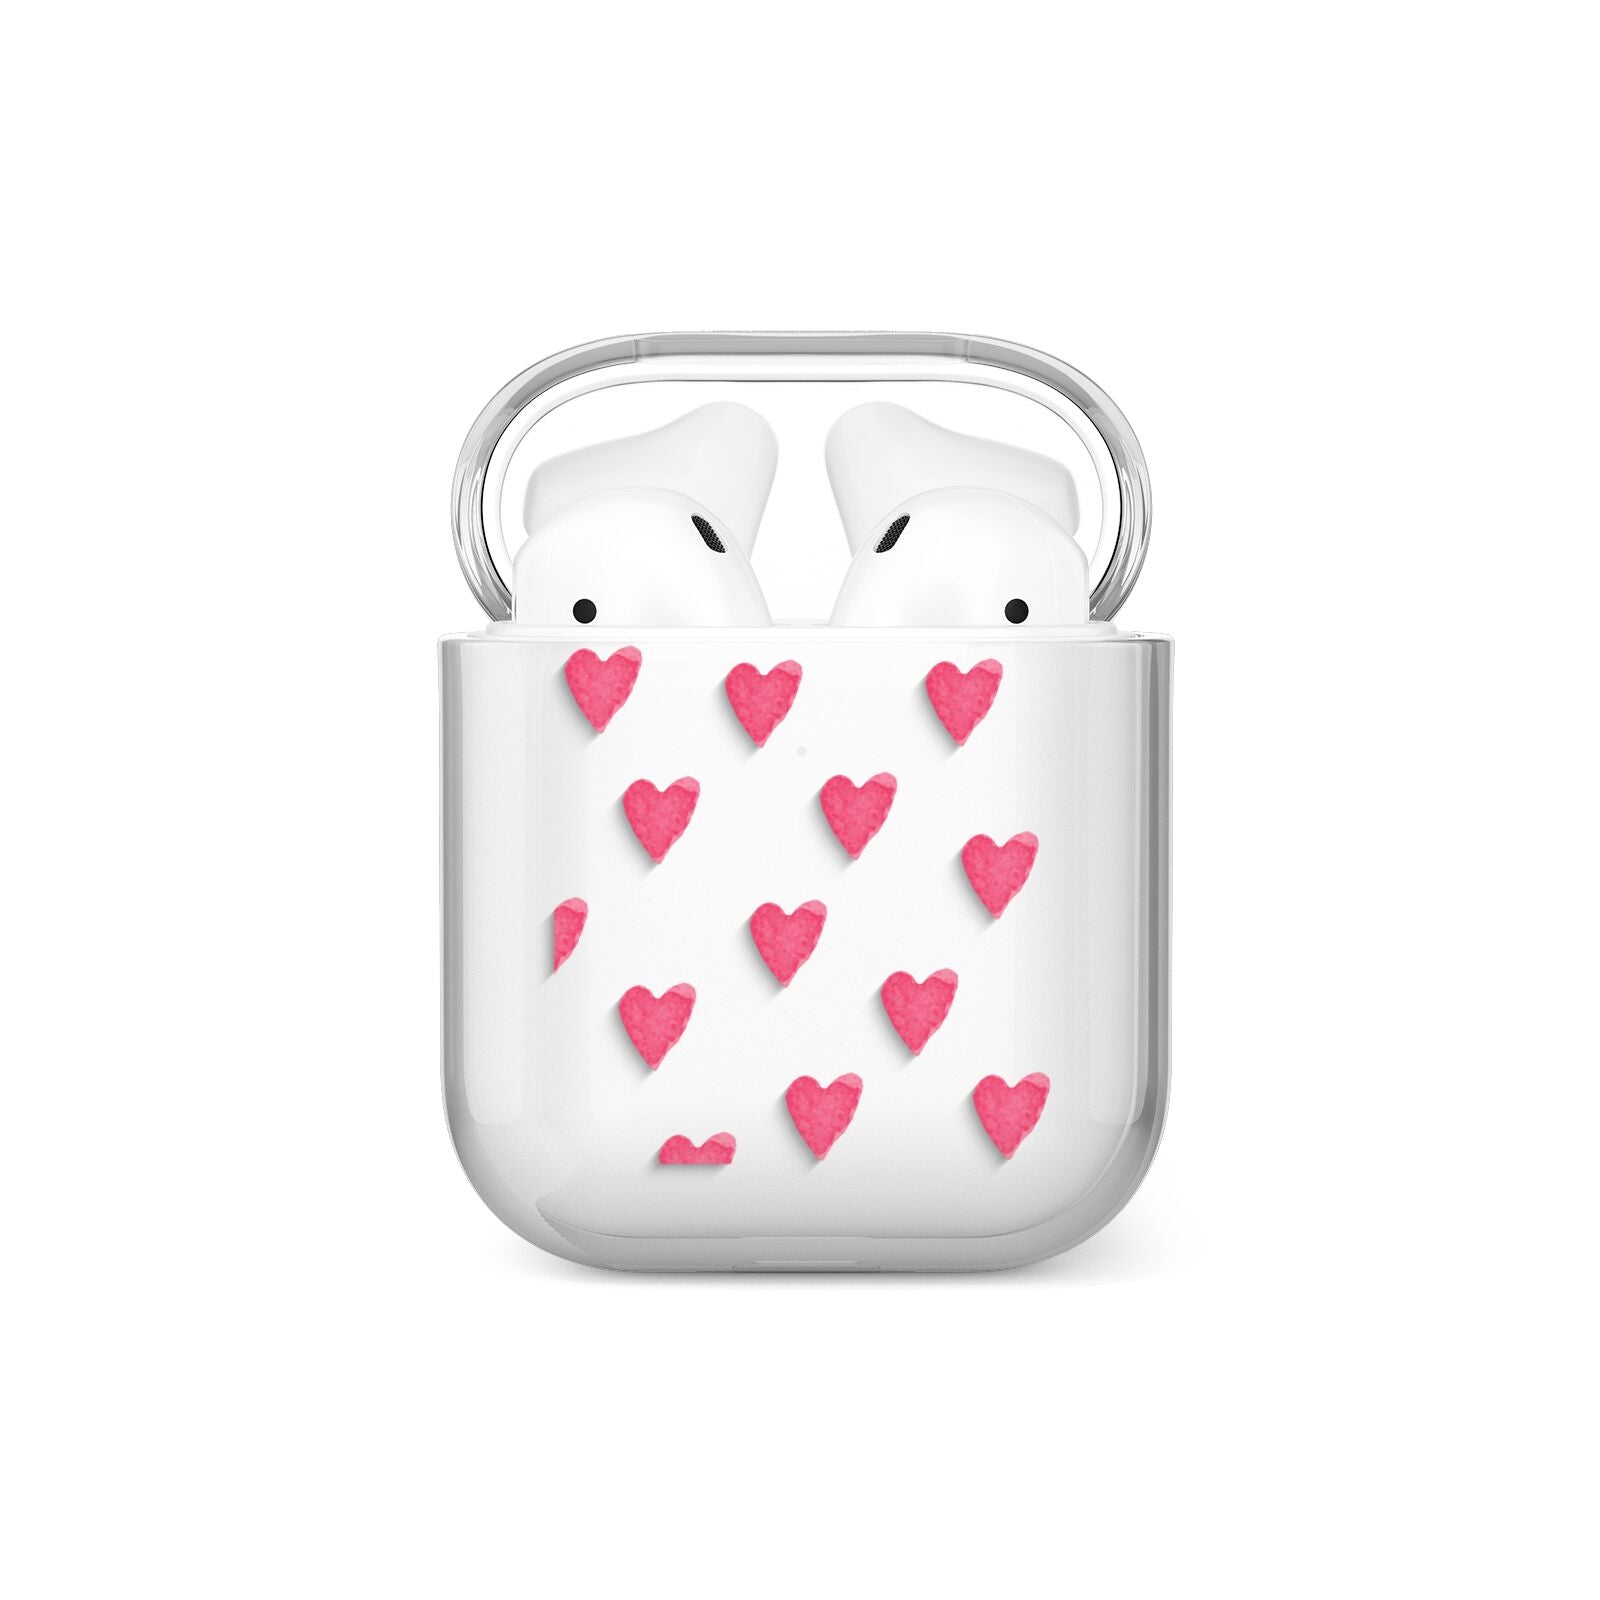 Heart Patterned AirPods Case